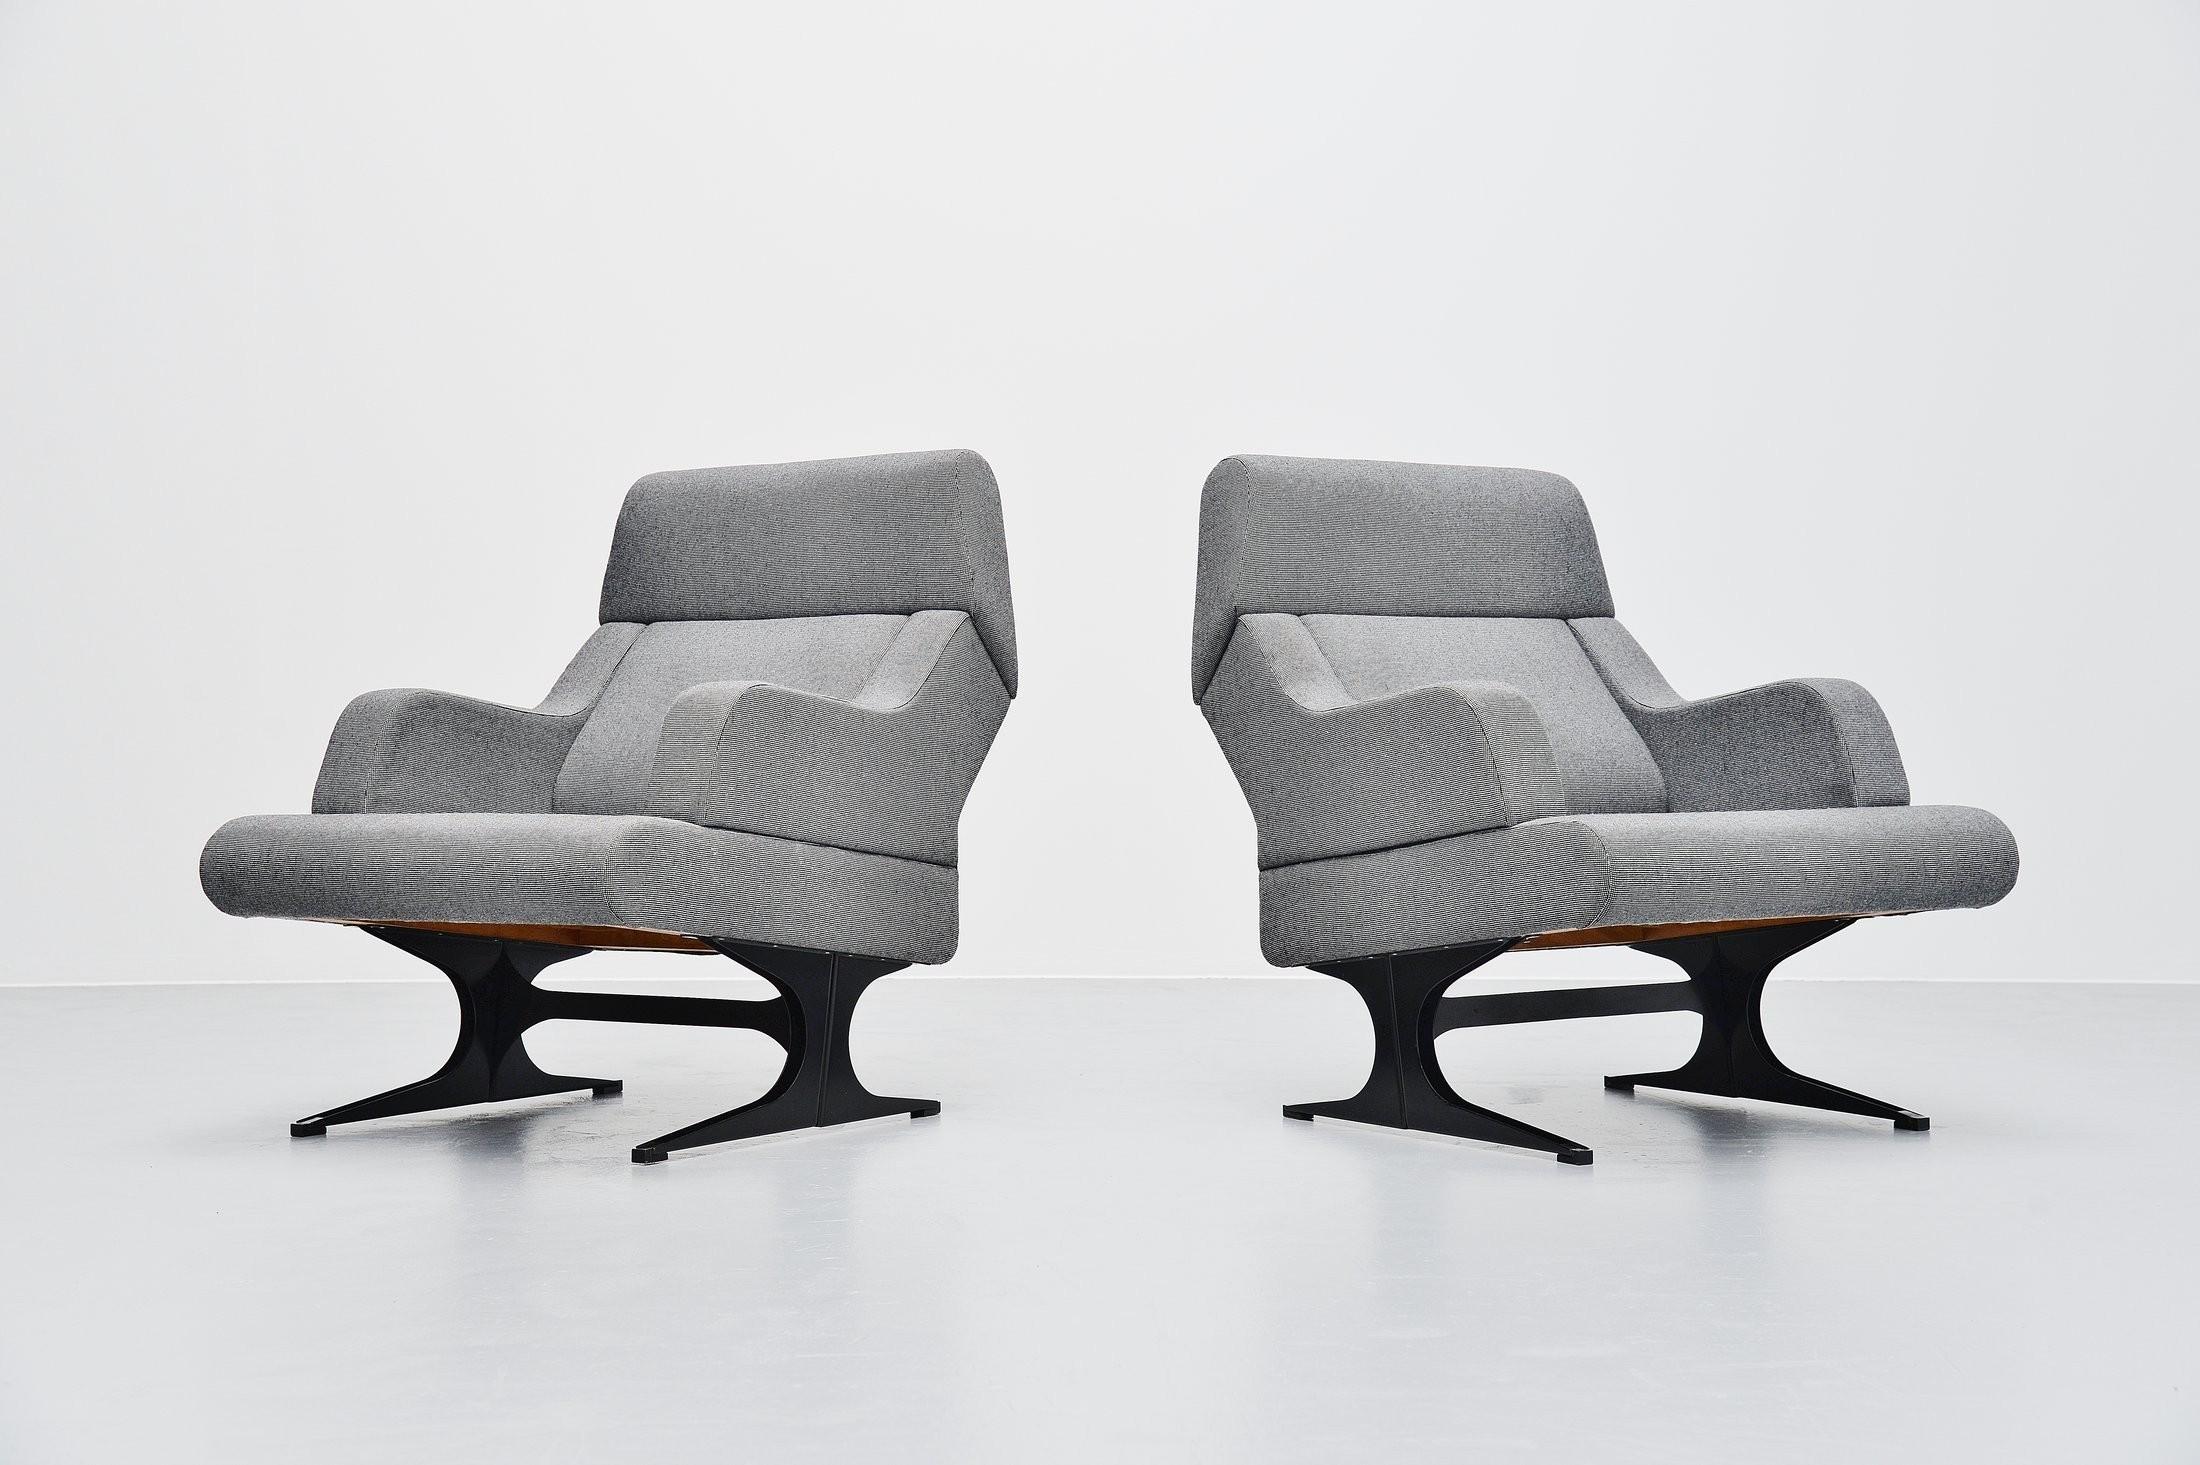 Rare pair of lounge chairs model SZ12 designed by Martin Visser and manufactured by 't Spectrum, Holland 1965. These chairs have a very nice shaped aluminium frame which is black coated. The chairs have been newly upholstered with a matching fabric